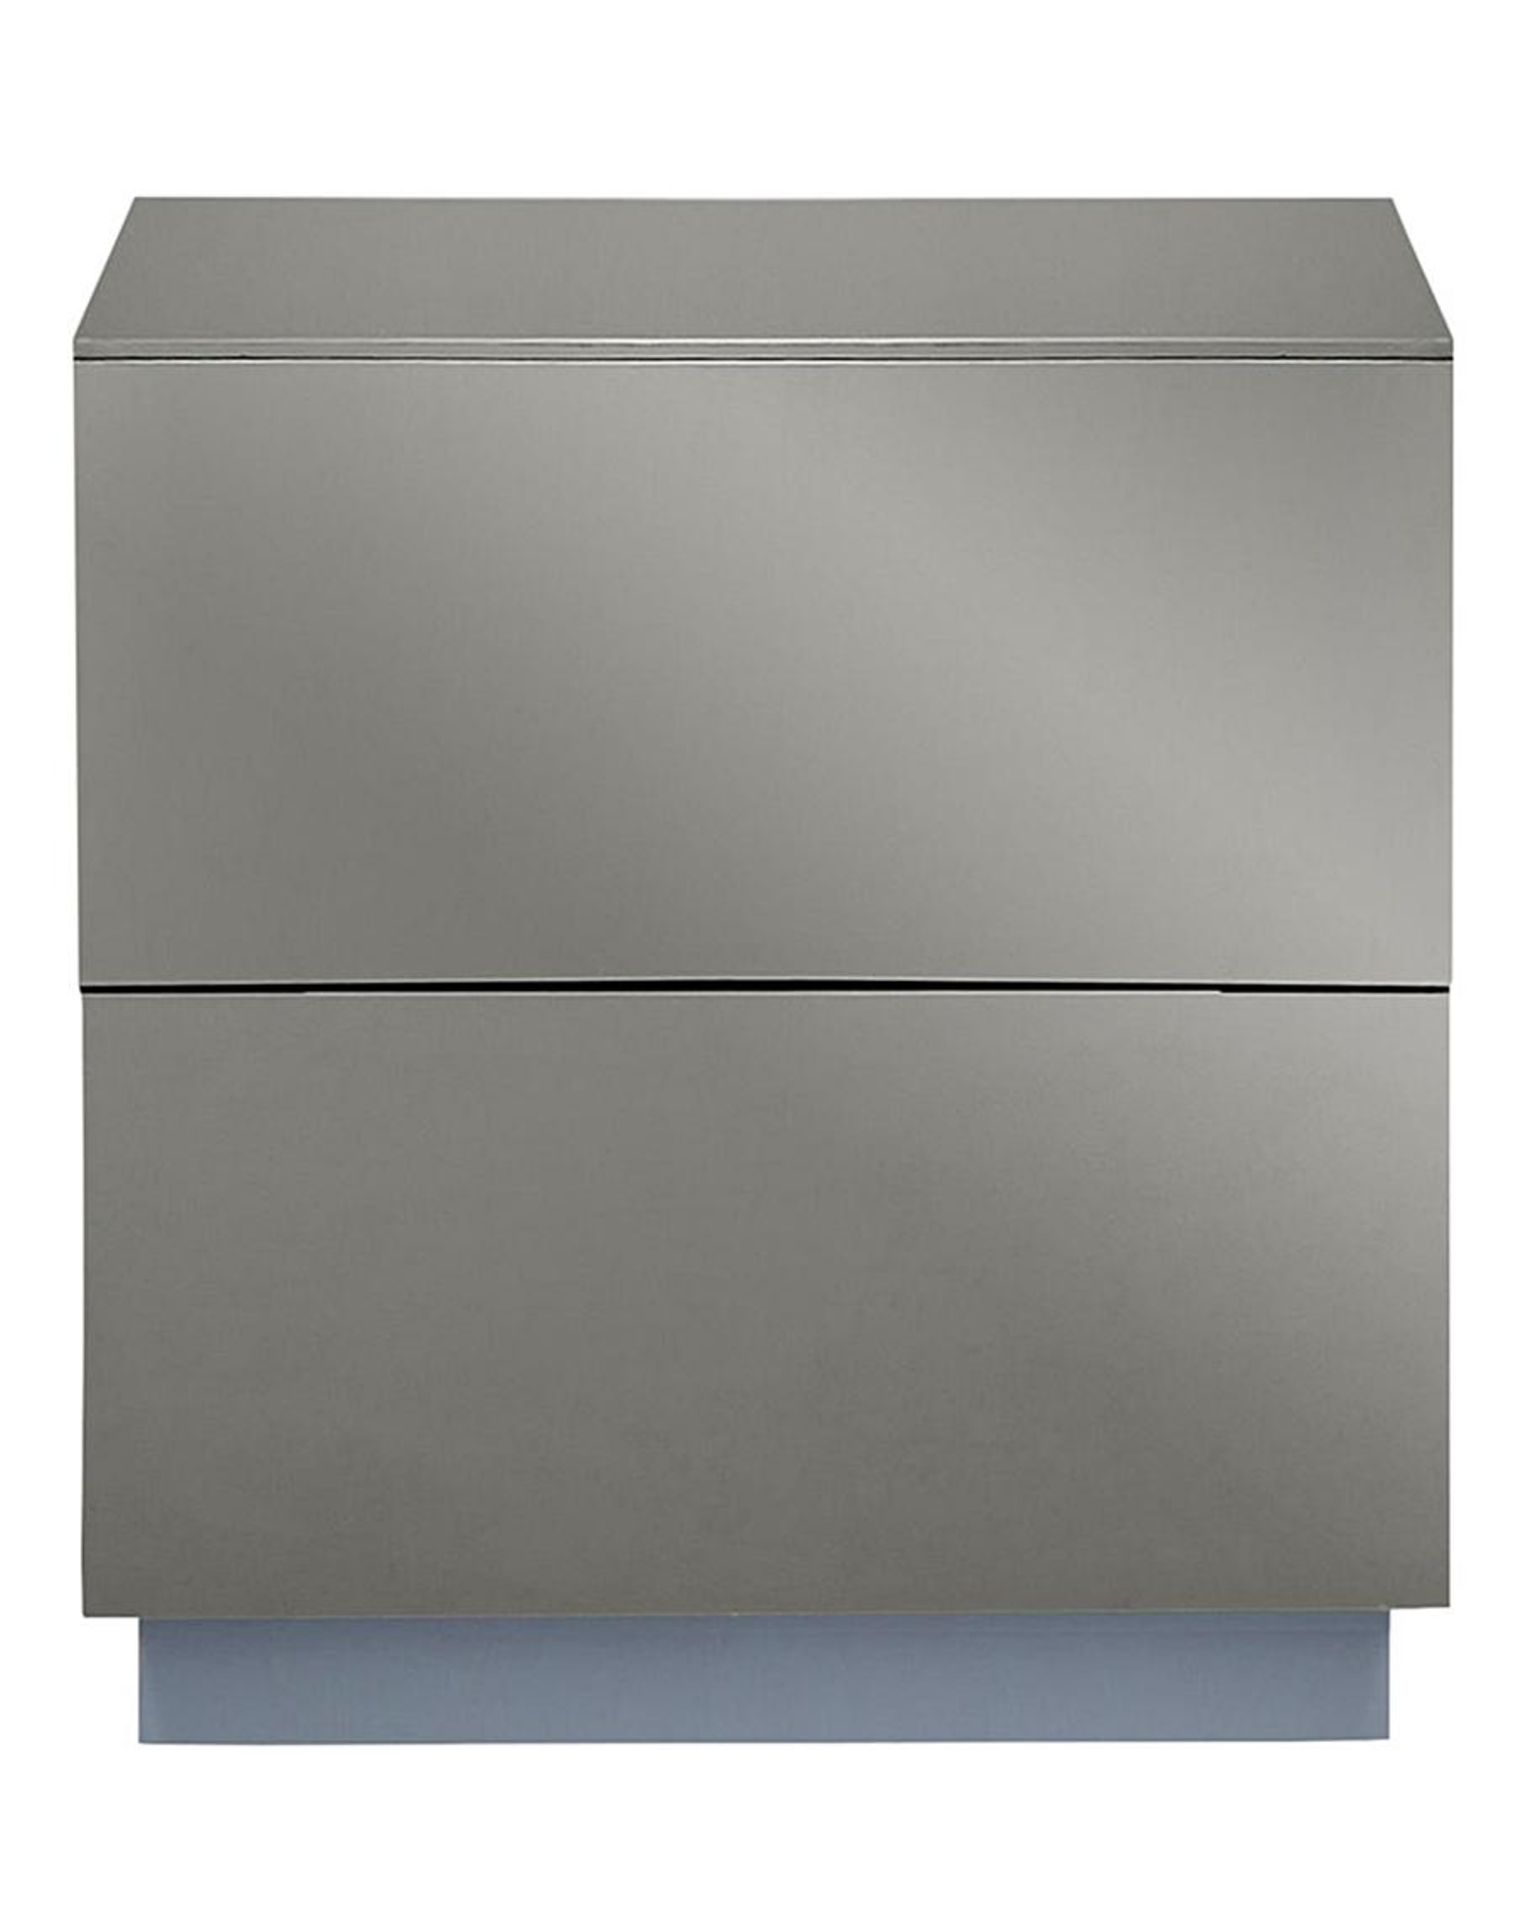 Allure High Gloss 2 Drawer Bedside Table. RRP £119.00. the Allure High Gloss Bedroom Range is